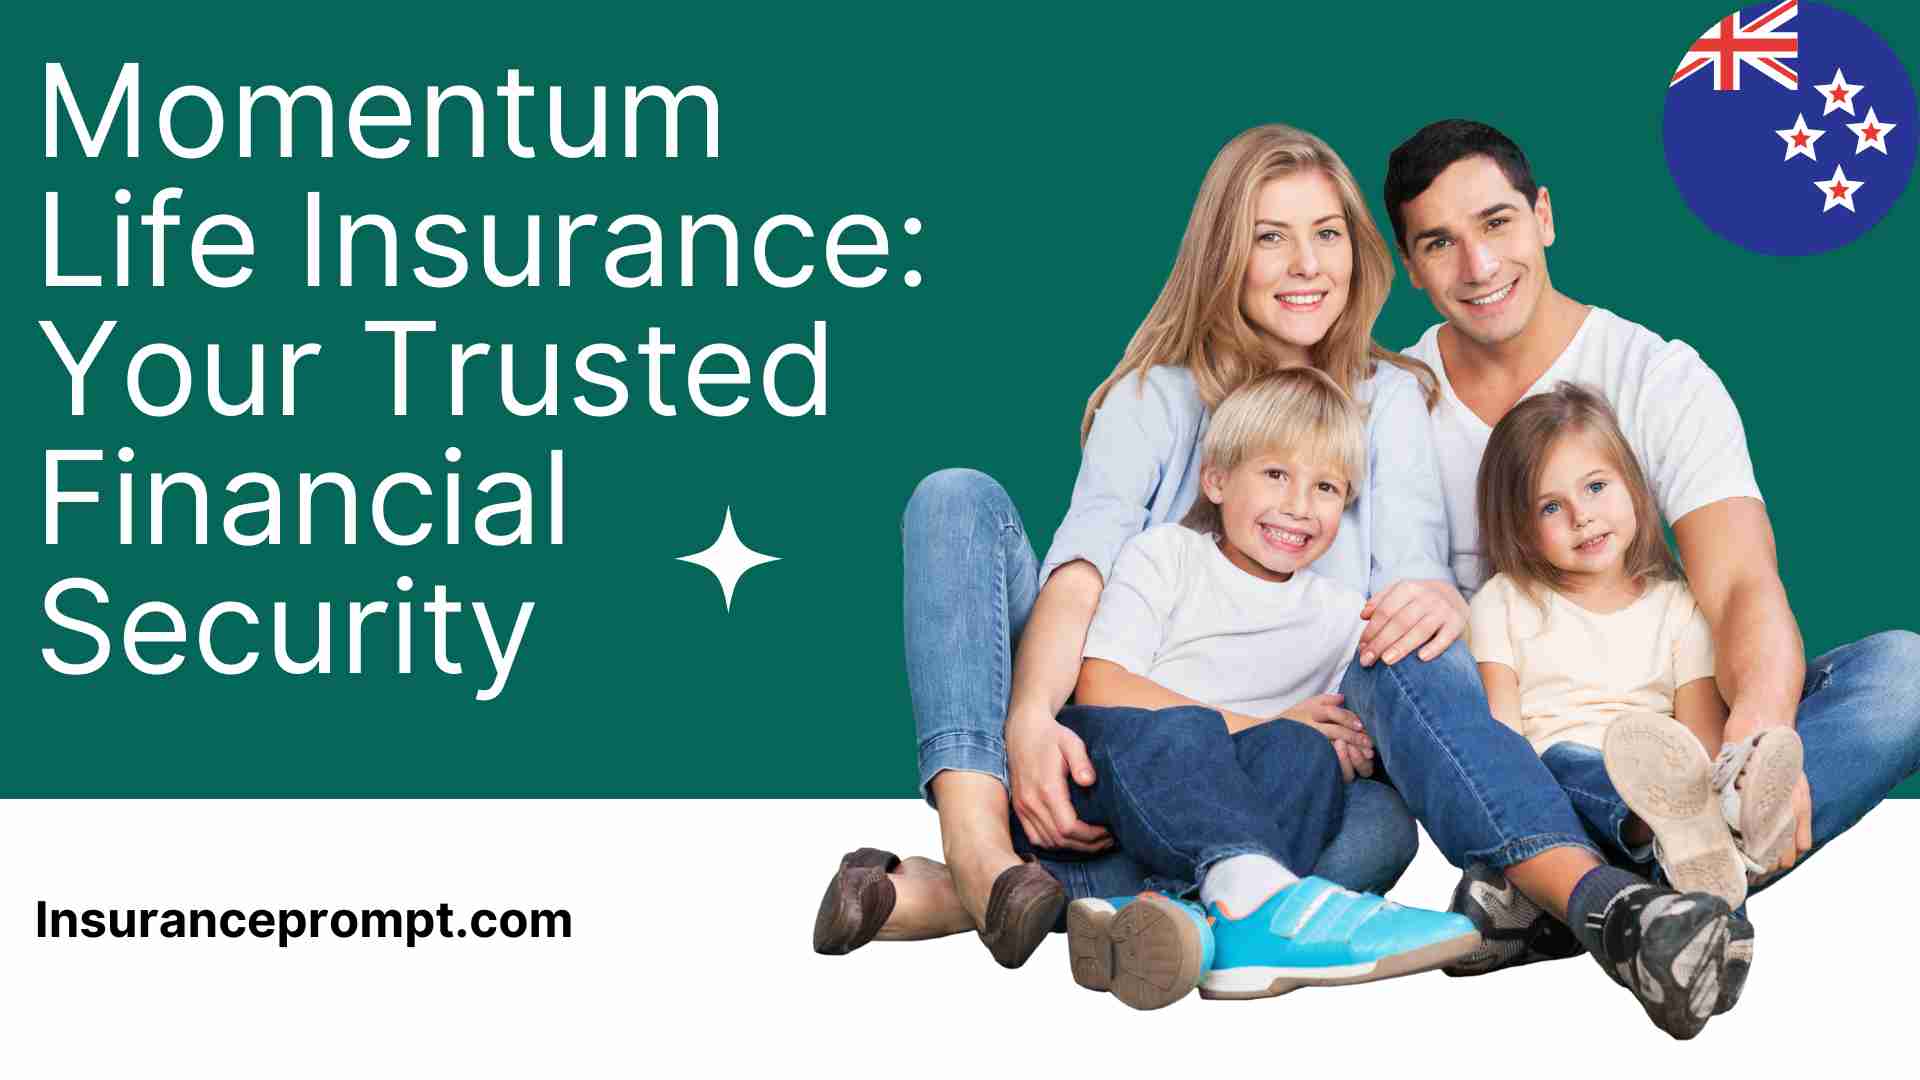 Momentum Life Insurance: Your Trusted Financial Security